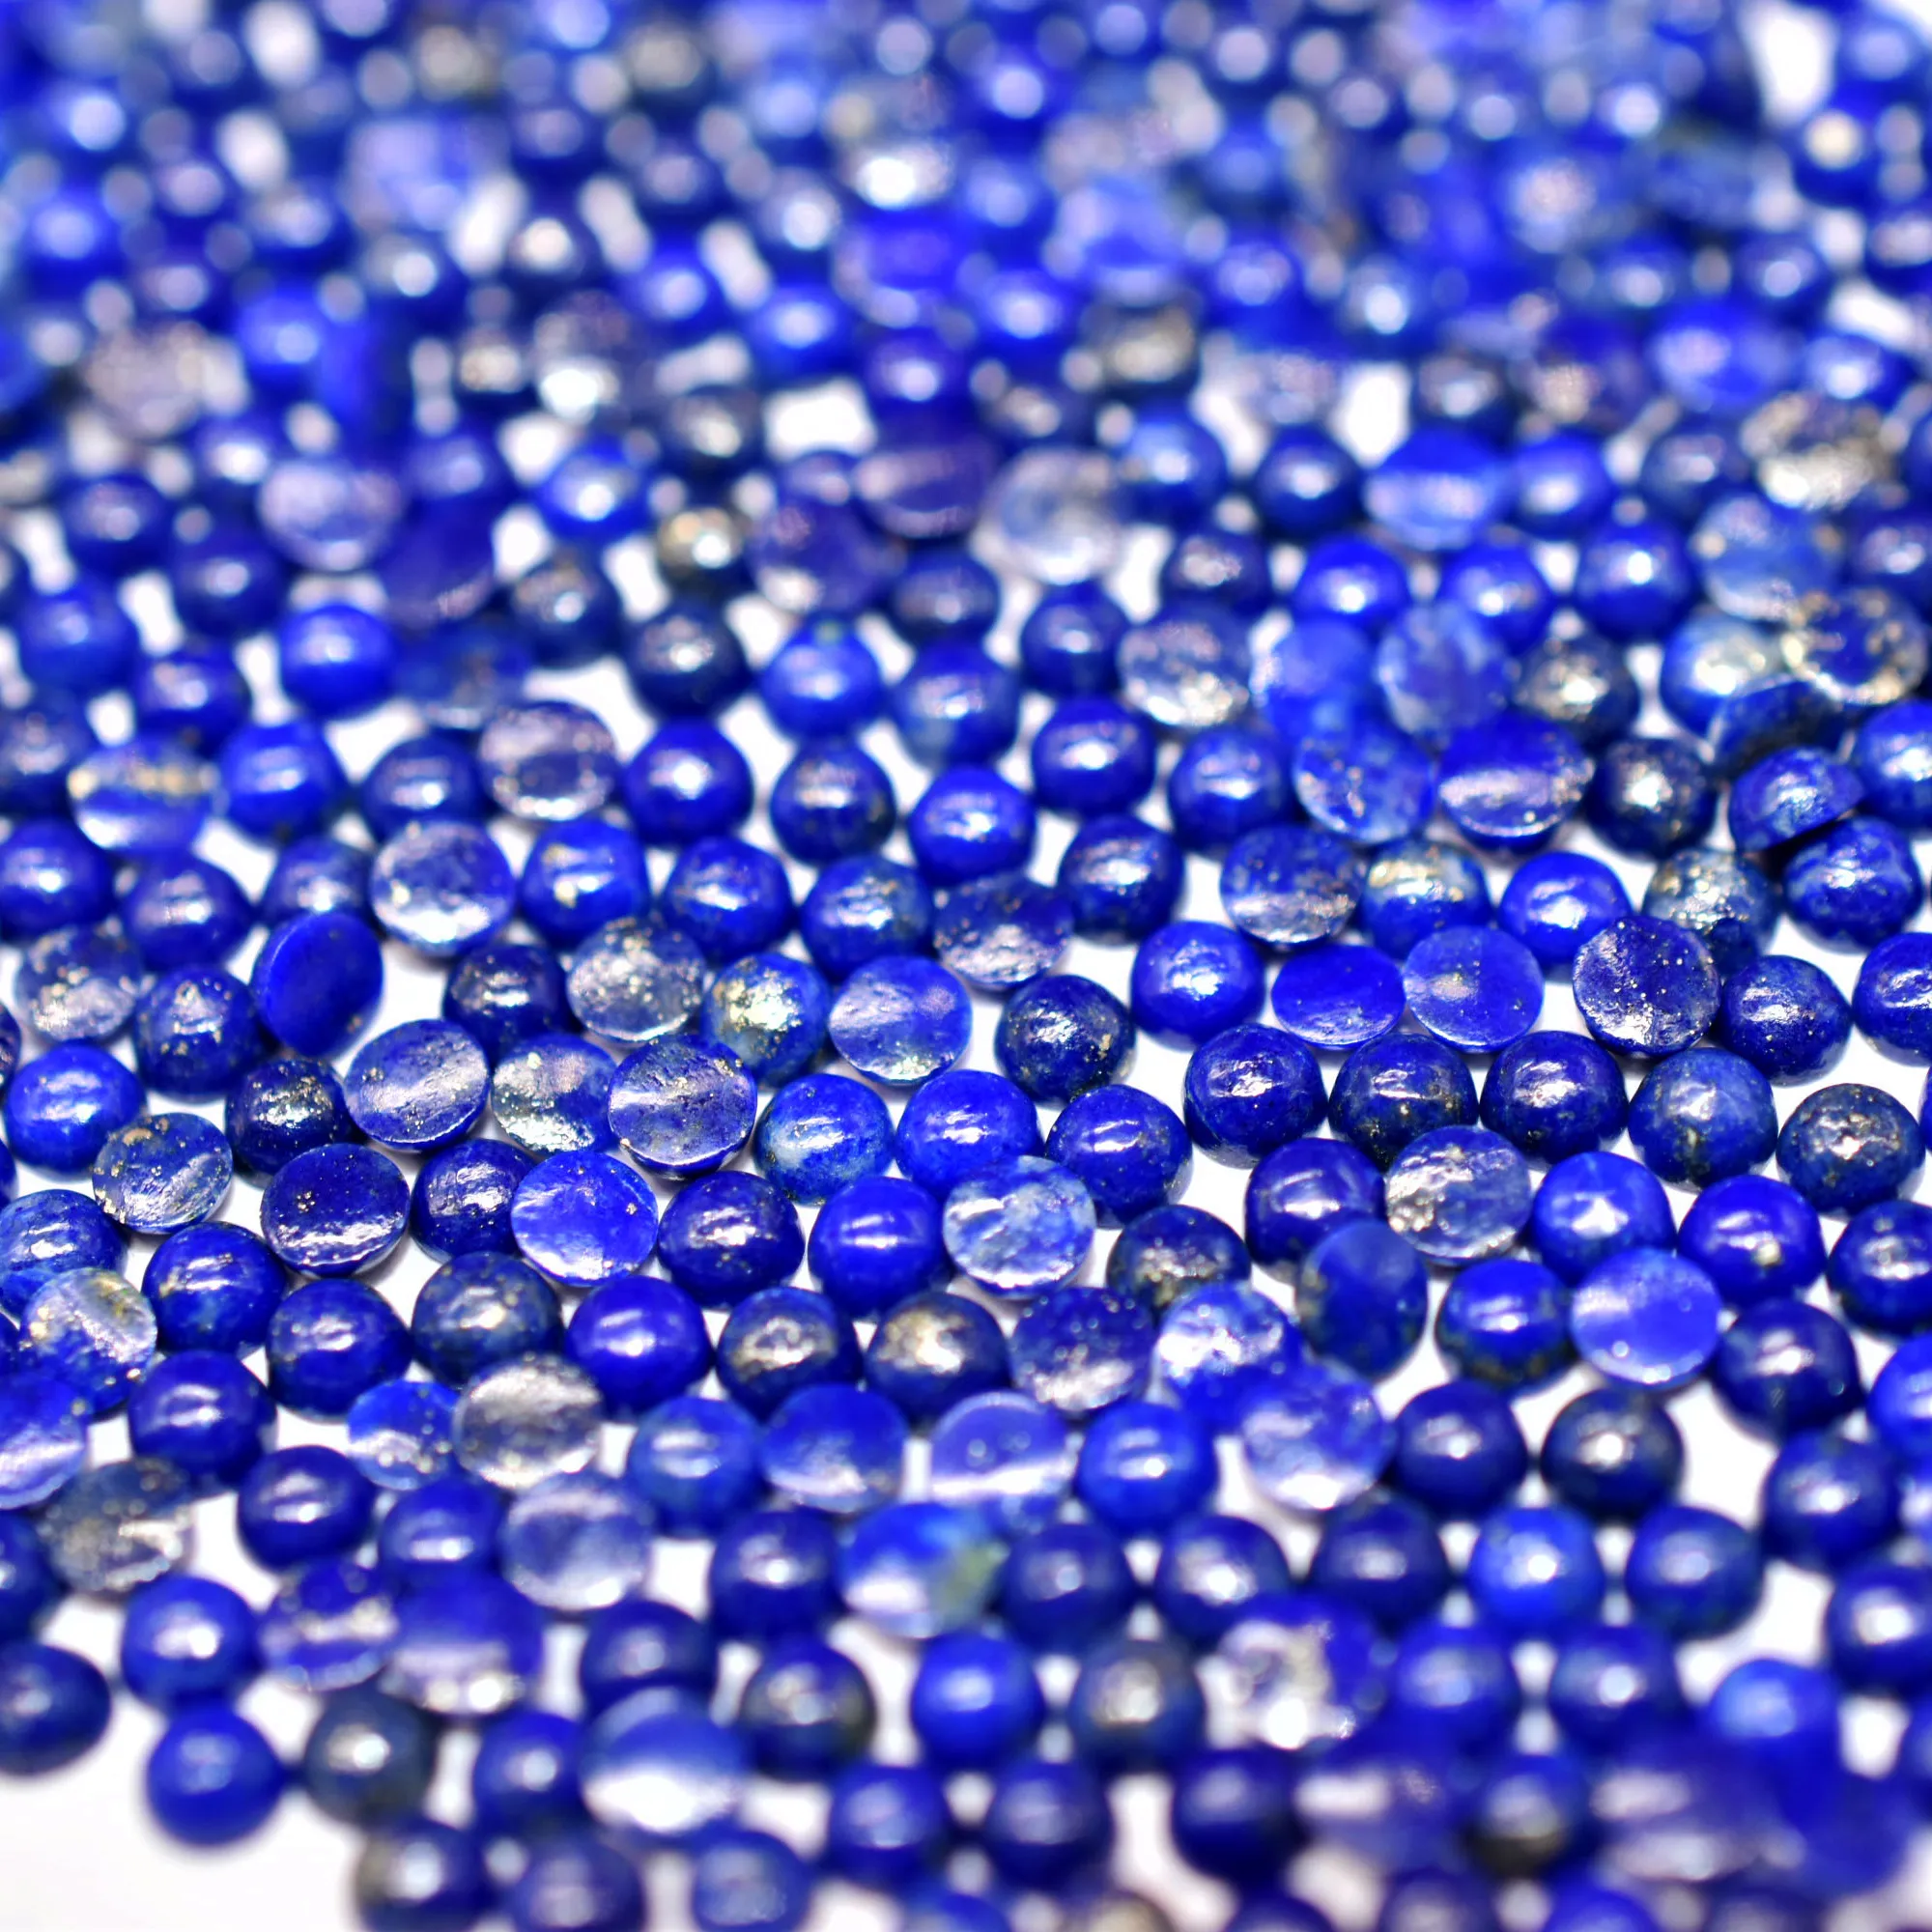 Natural Lapis Lazuli Rounds Cabochons 2MM 2.50MM 3MM Round Cabochon Loose Lapis Lazuli Crystal Gemstone For Jewelry and Crafts